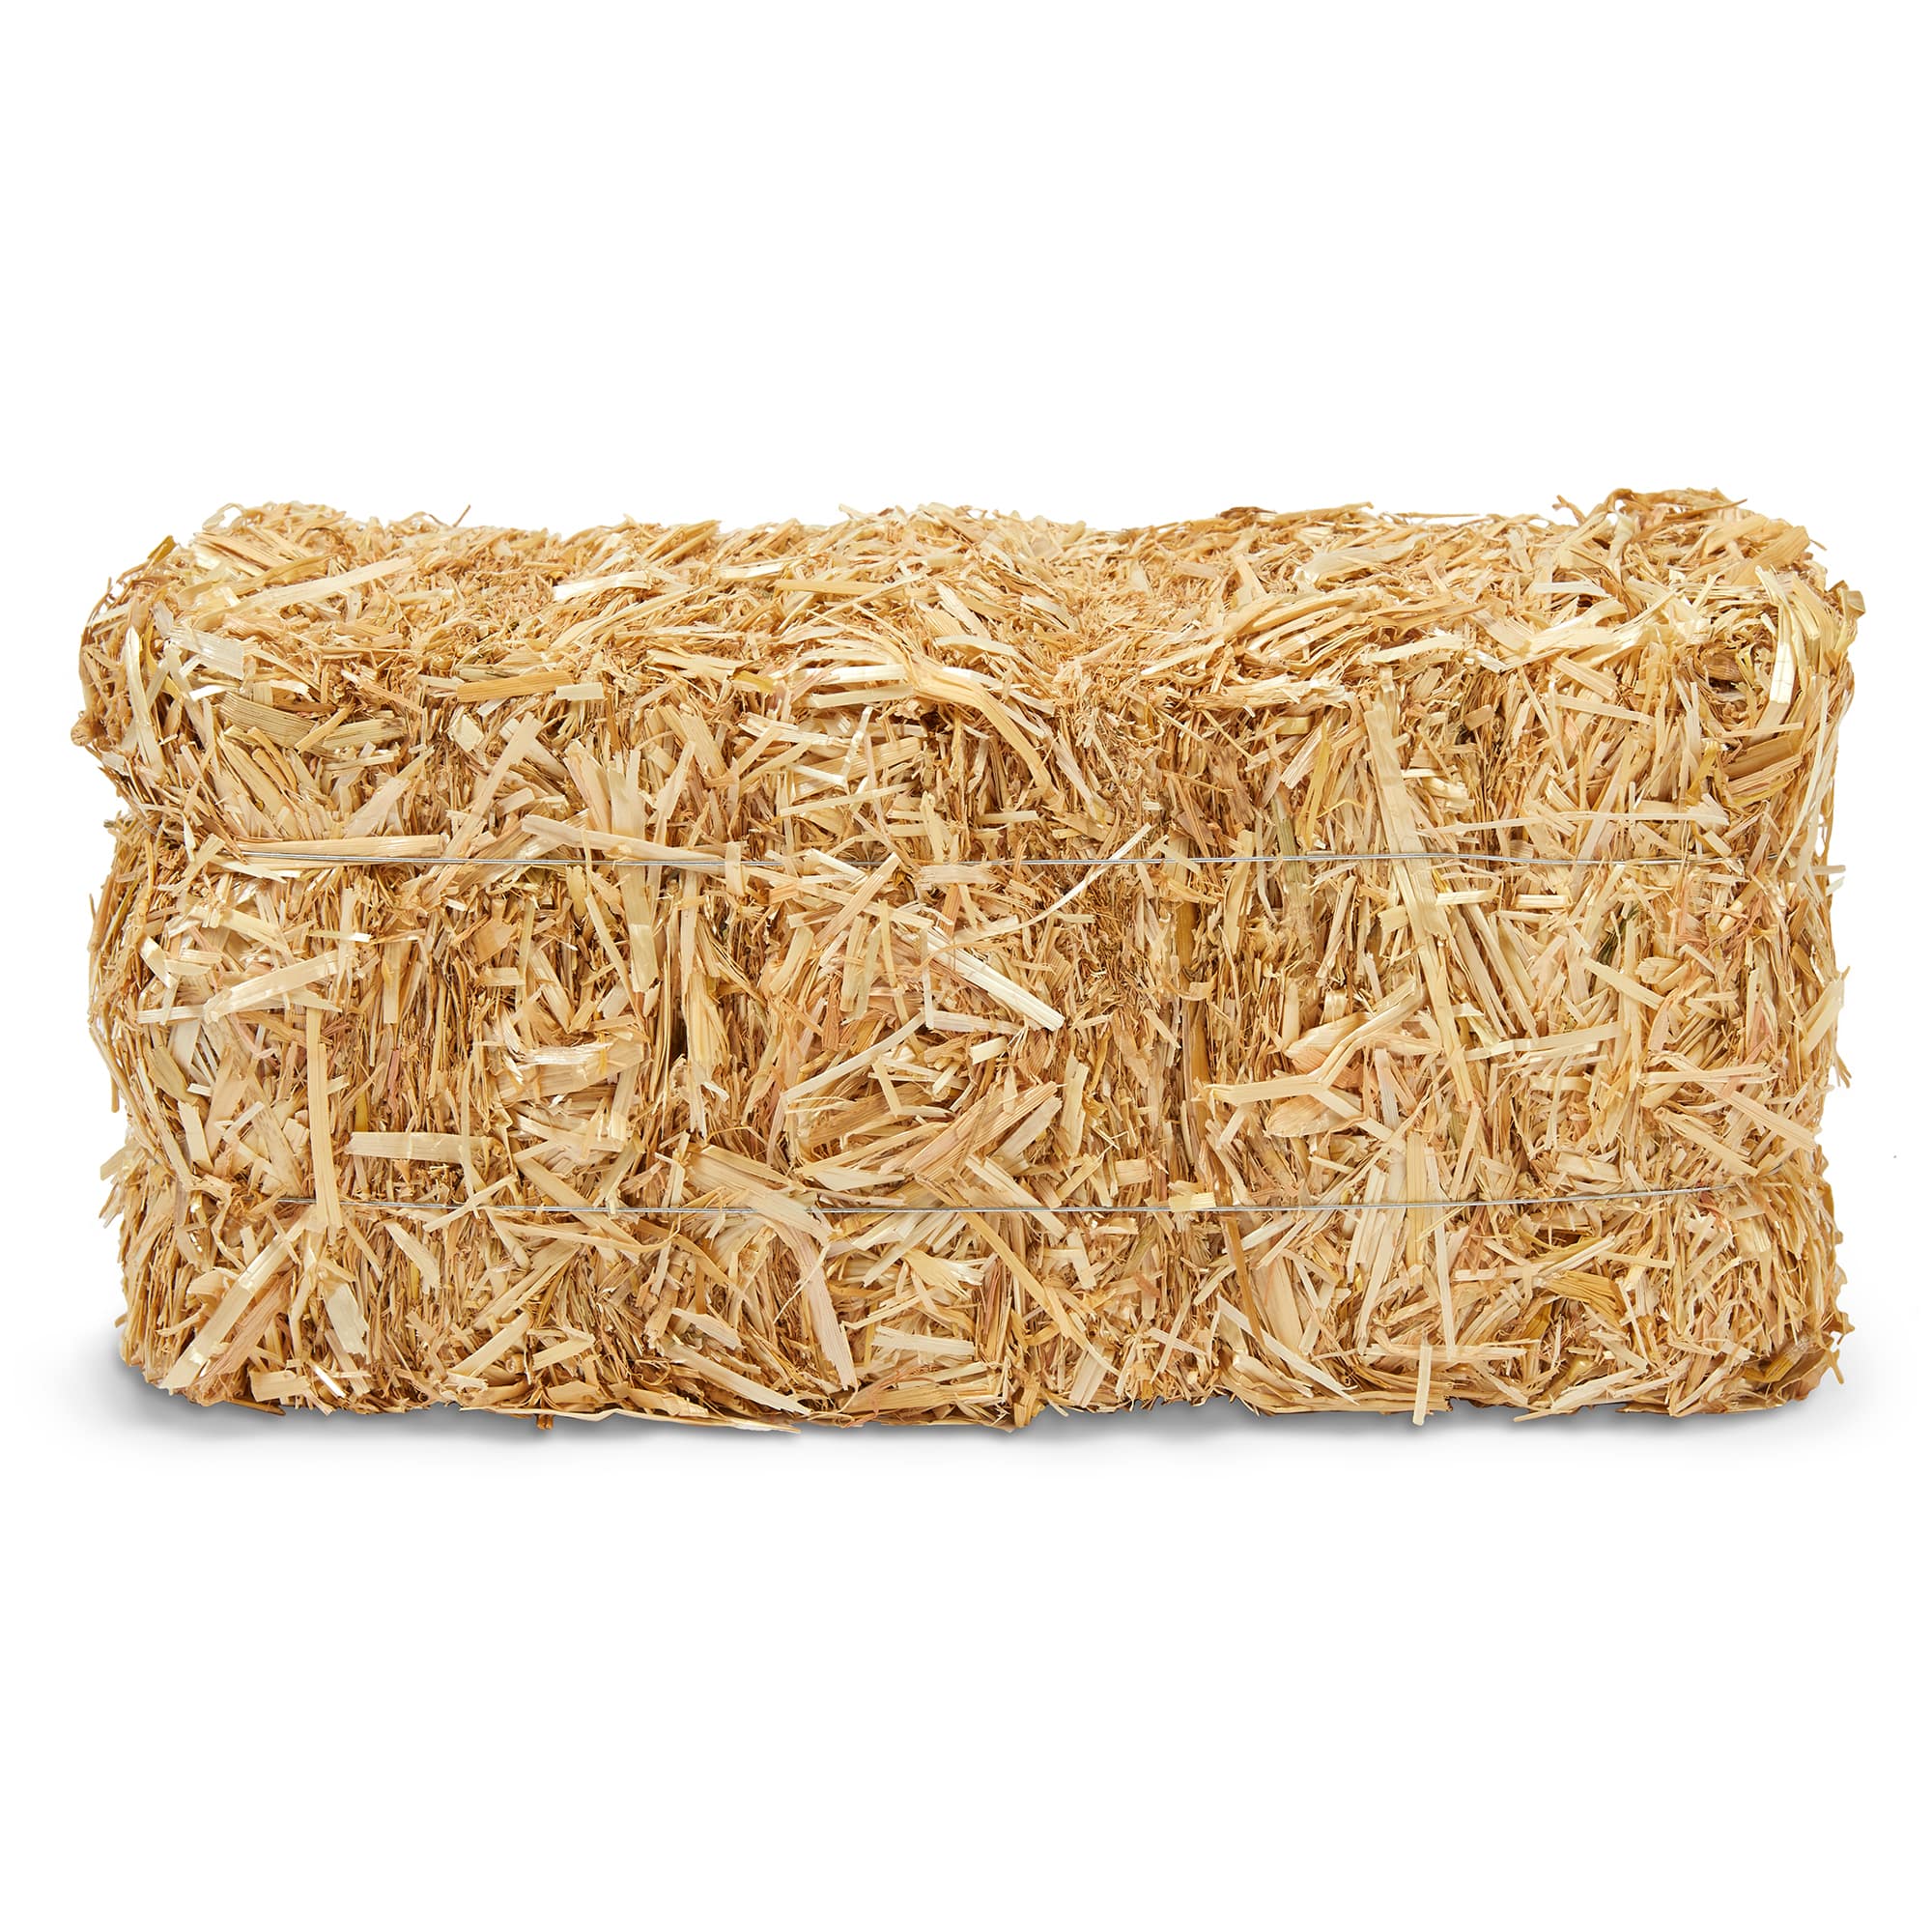 Decorative Straw Bale by Ashland in Natural | 13 x 6 x 5 | Michaels